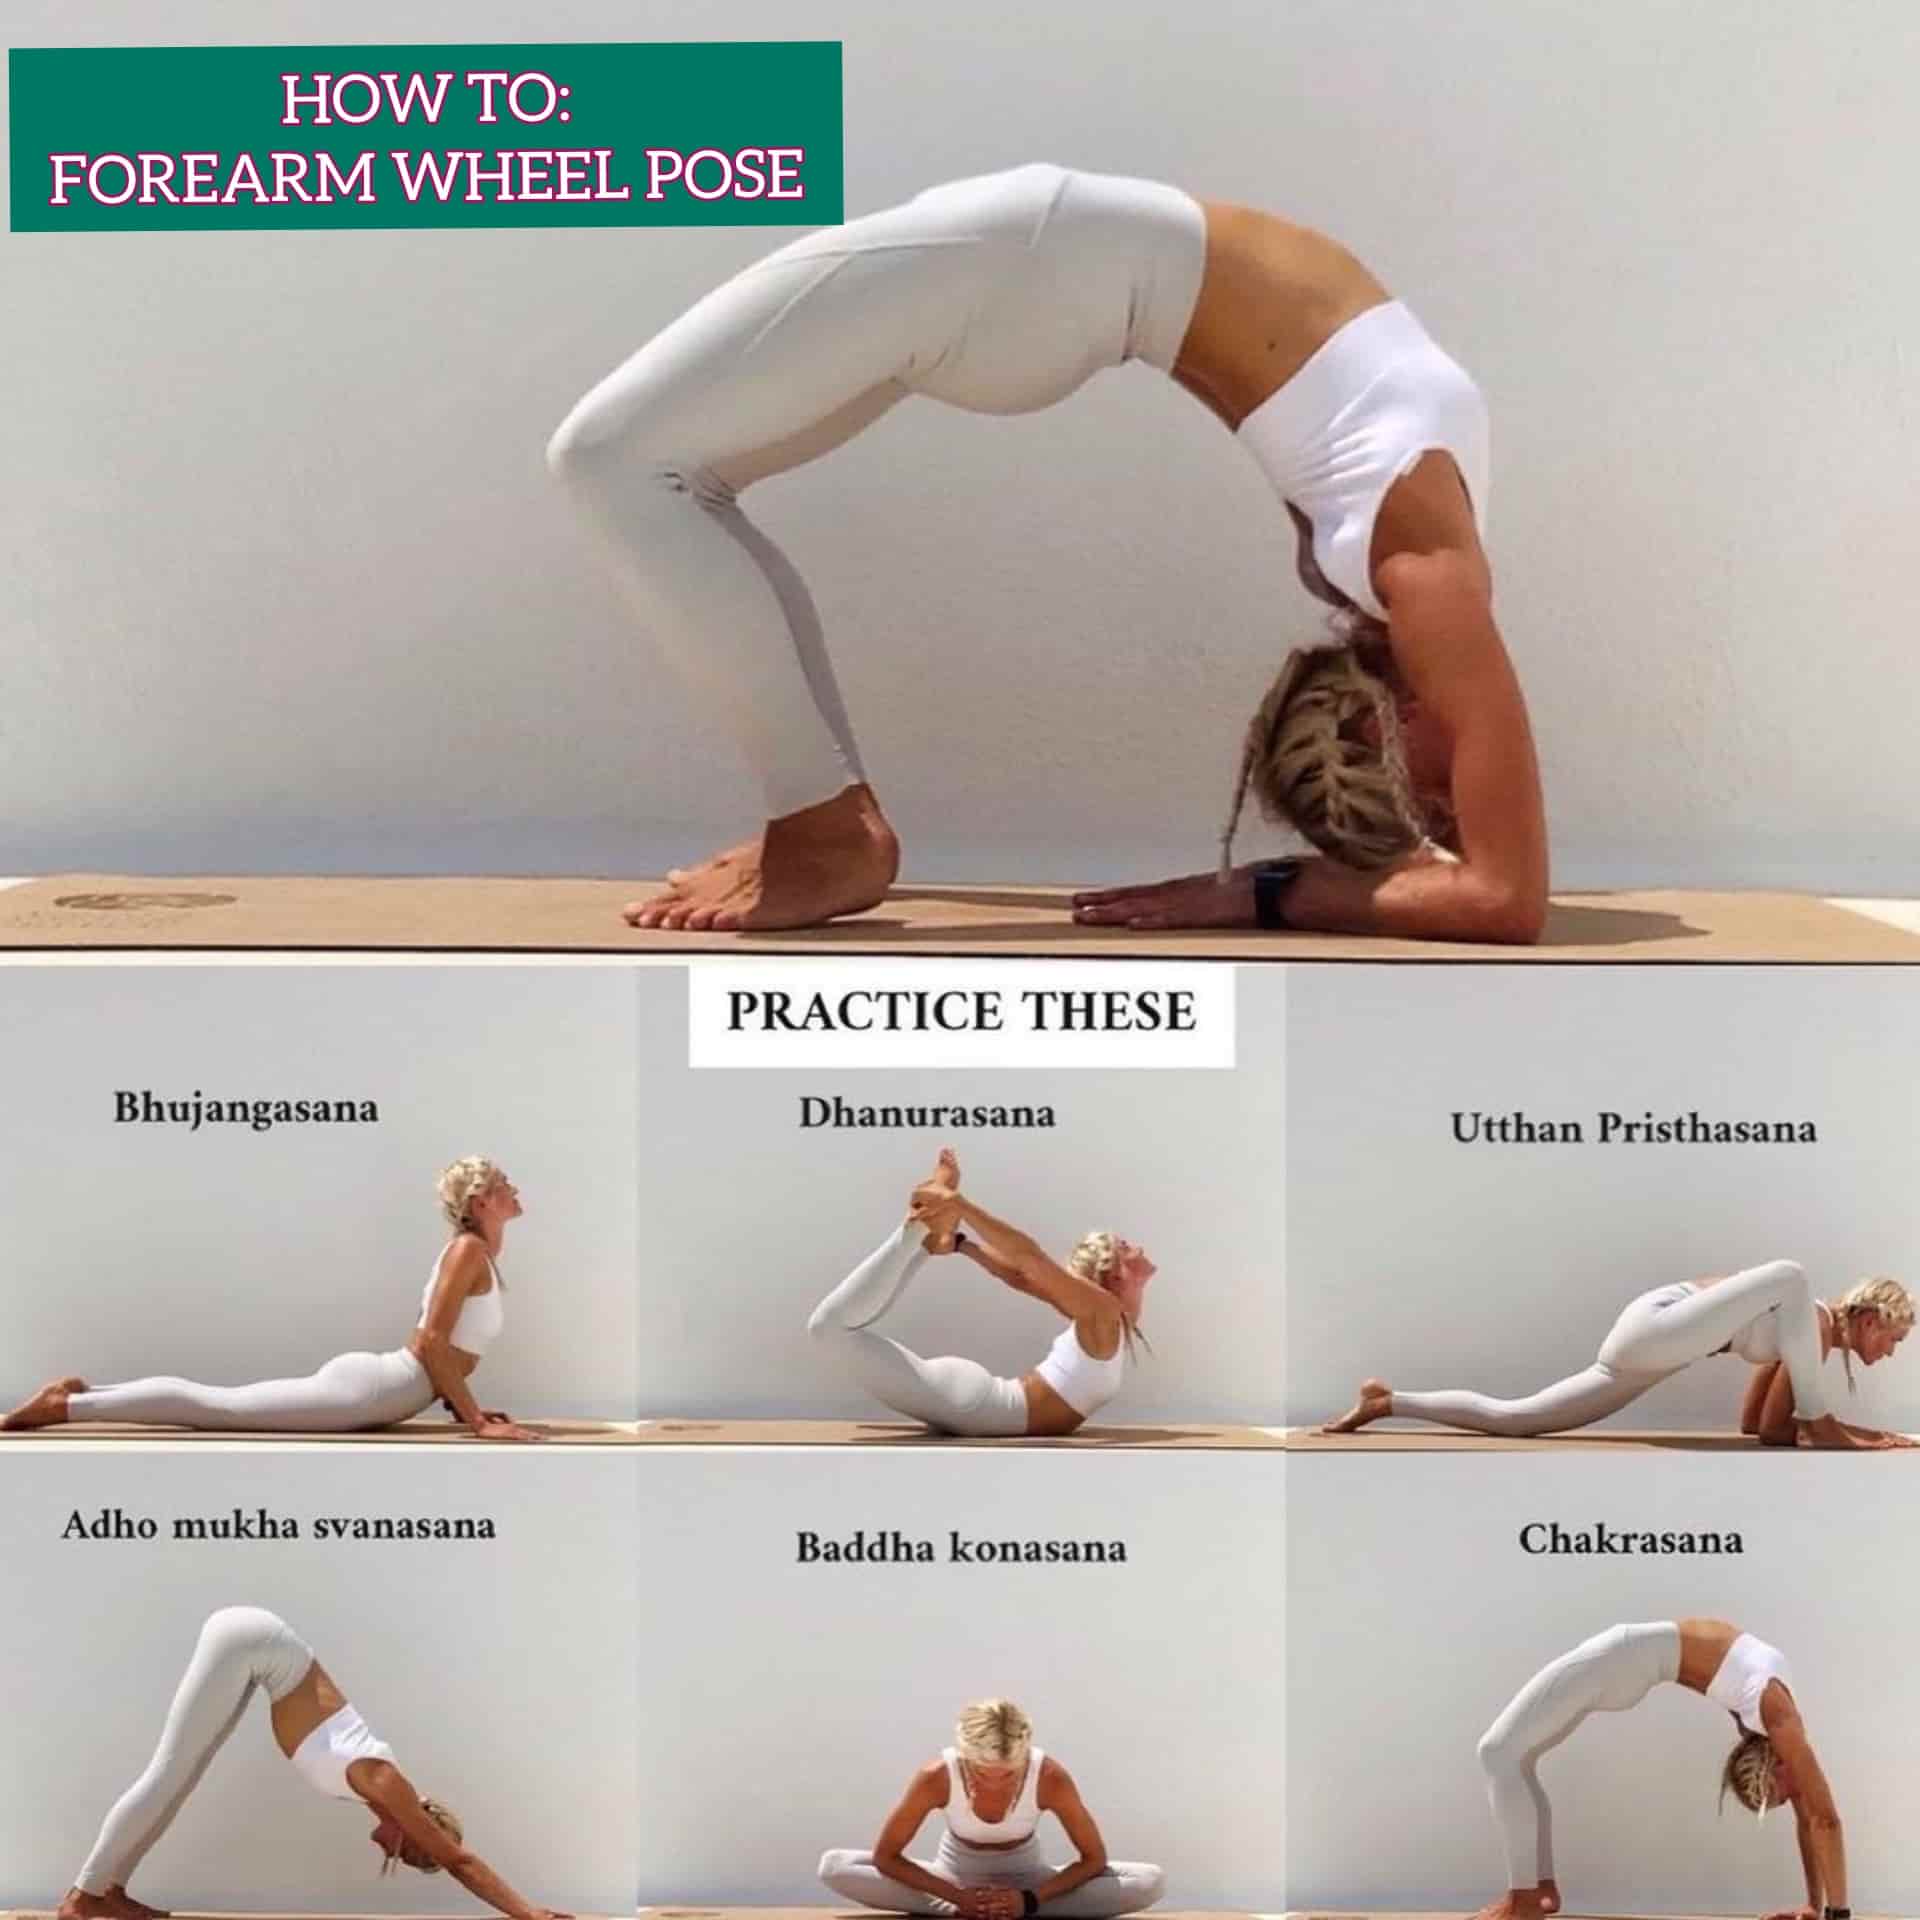 Steps of Forearm Wheel Pose fitzabout